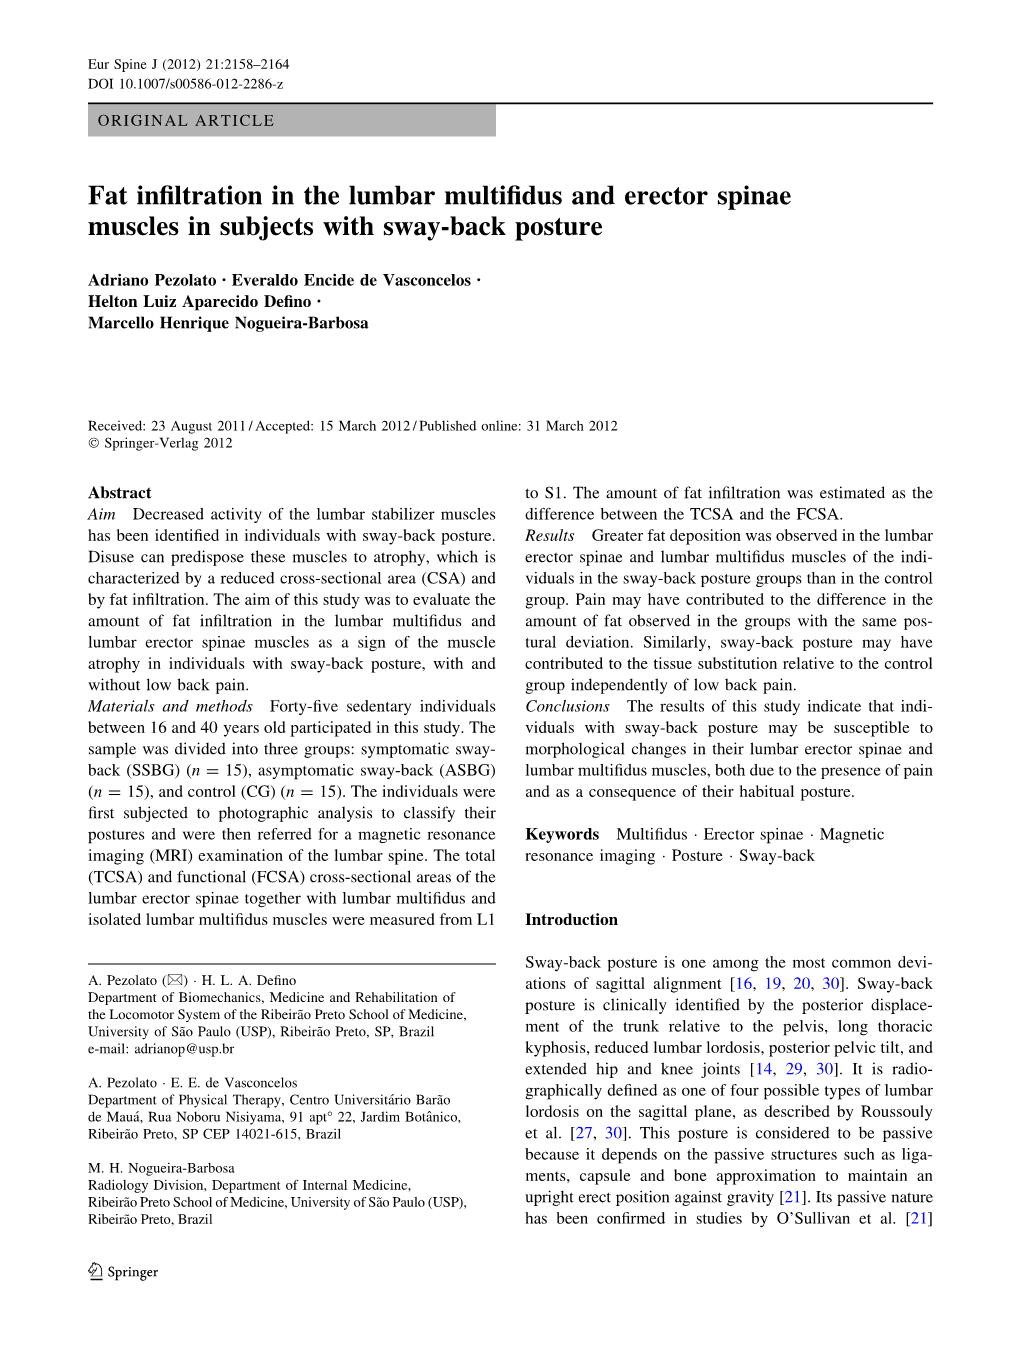 Fat Infiltration in the Lumbar Multifidus and Erector Spinae Muscles In